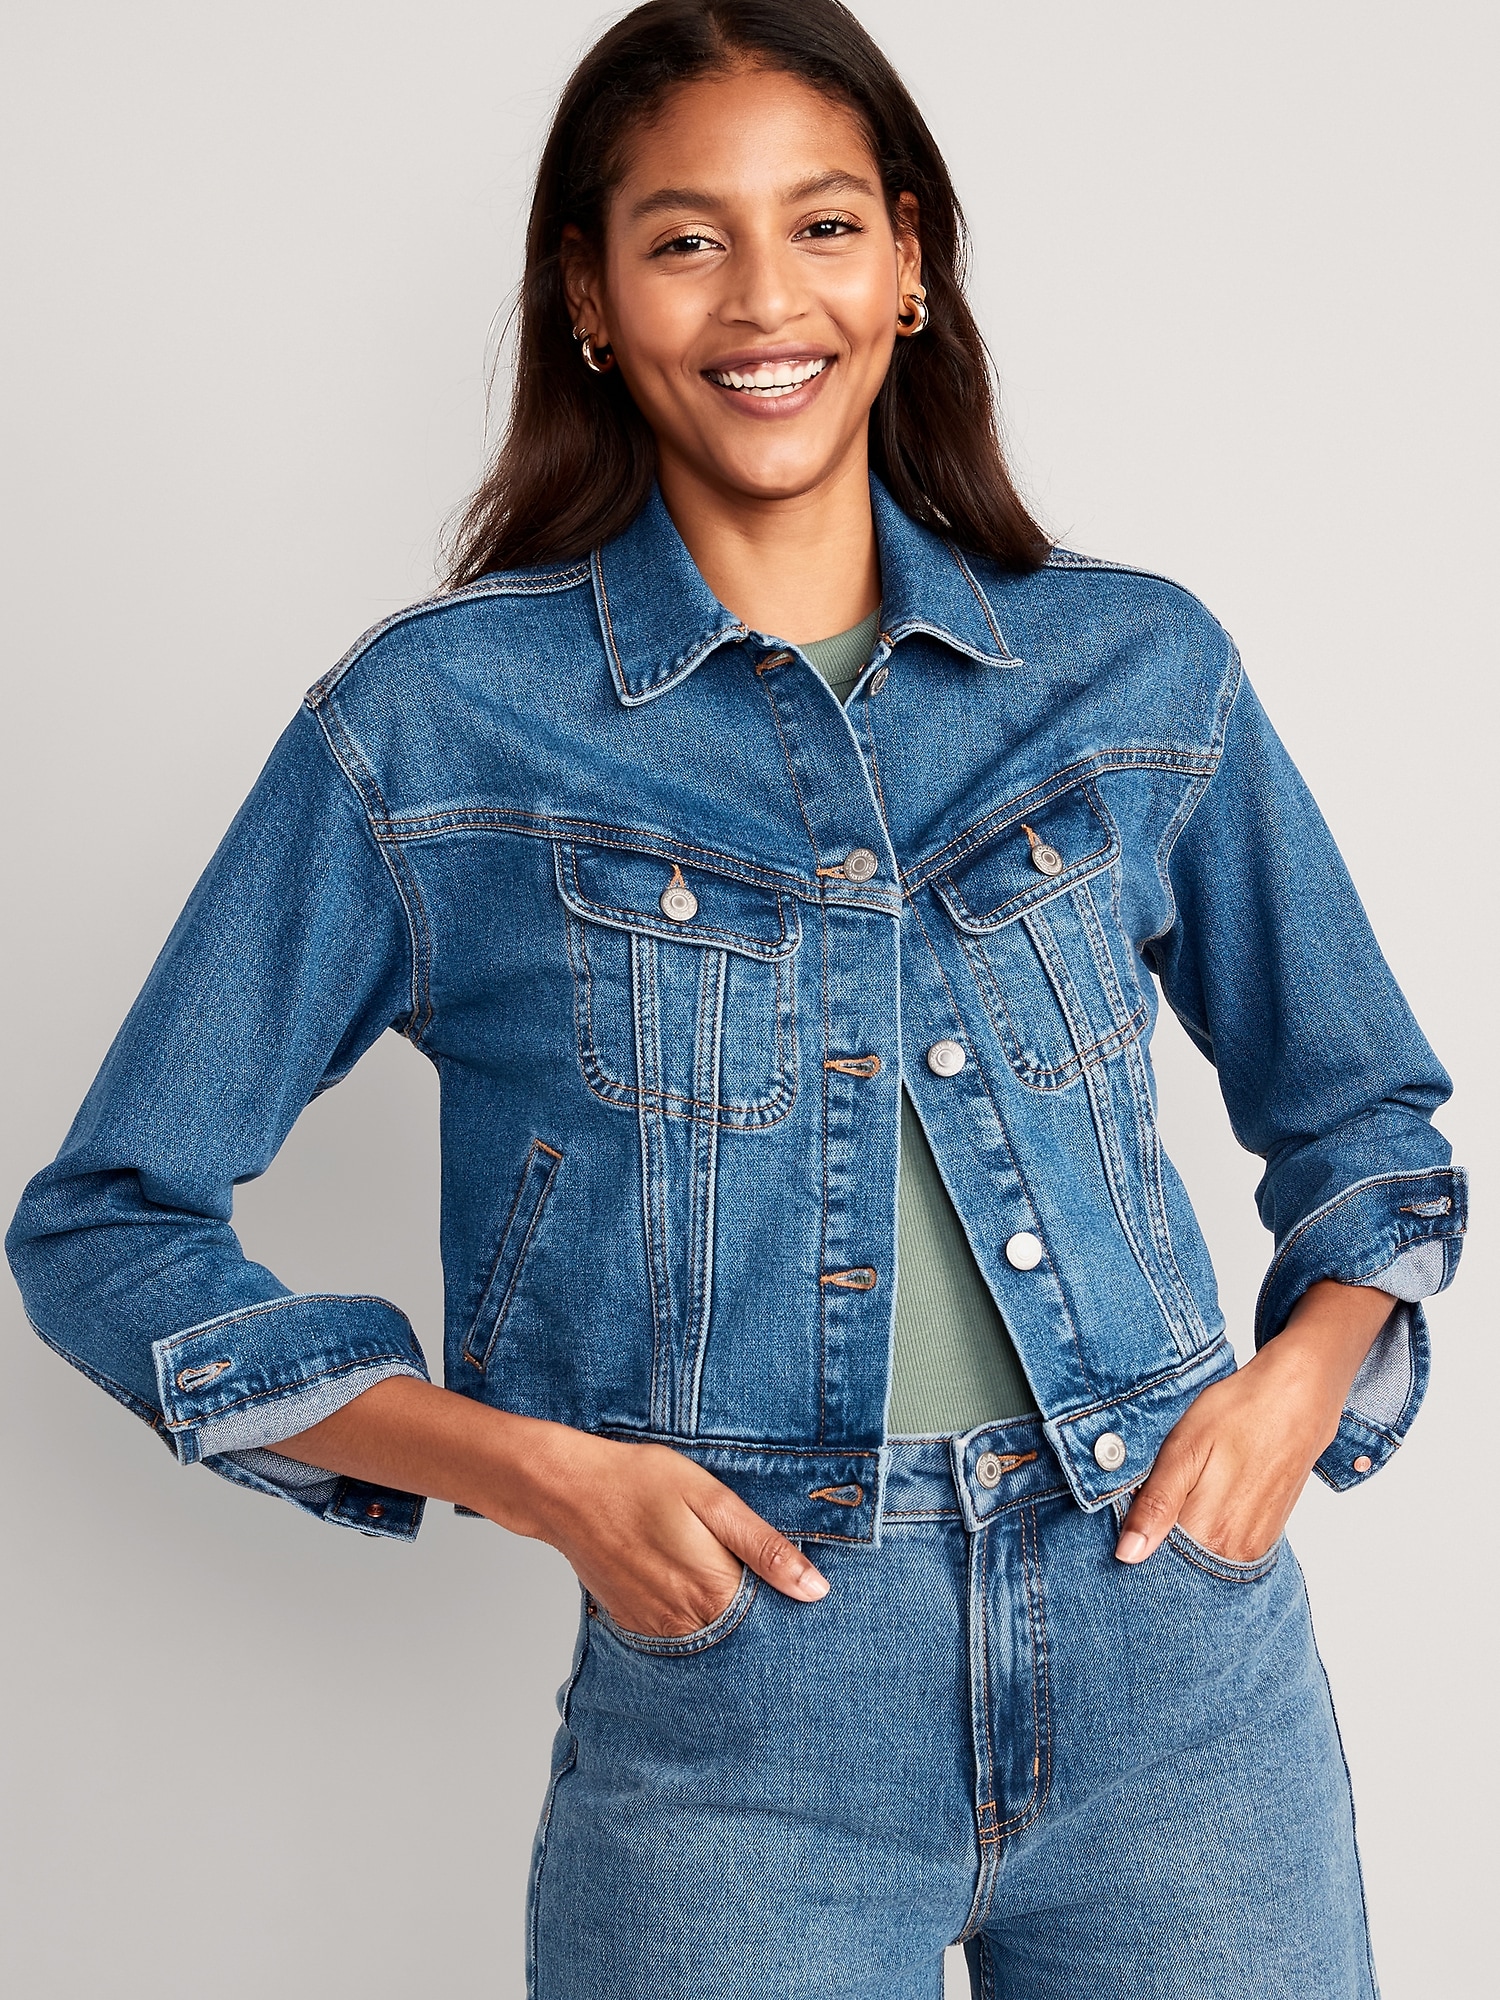 Buy Wrangler Authentics Women's Denim Jacket, Drenched, X-Large at Amazon.in